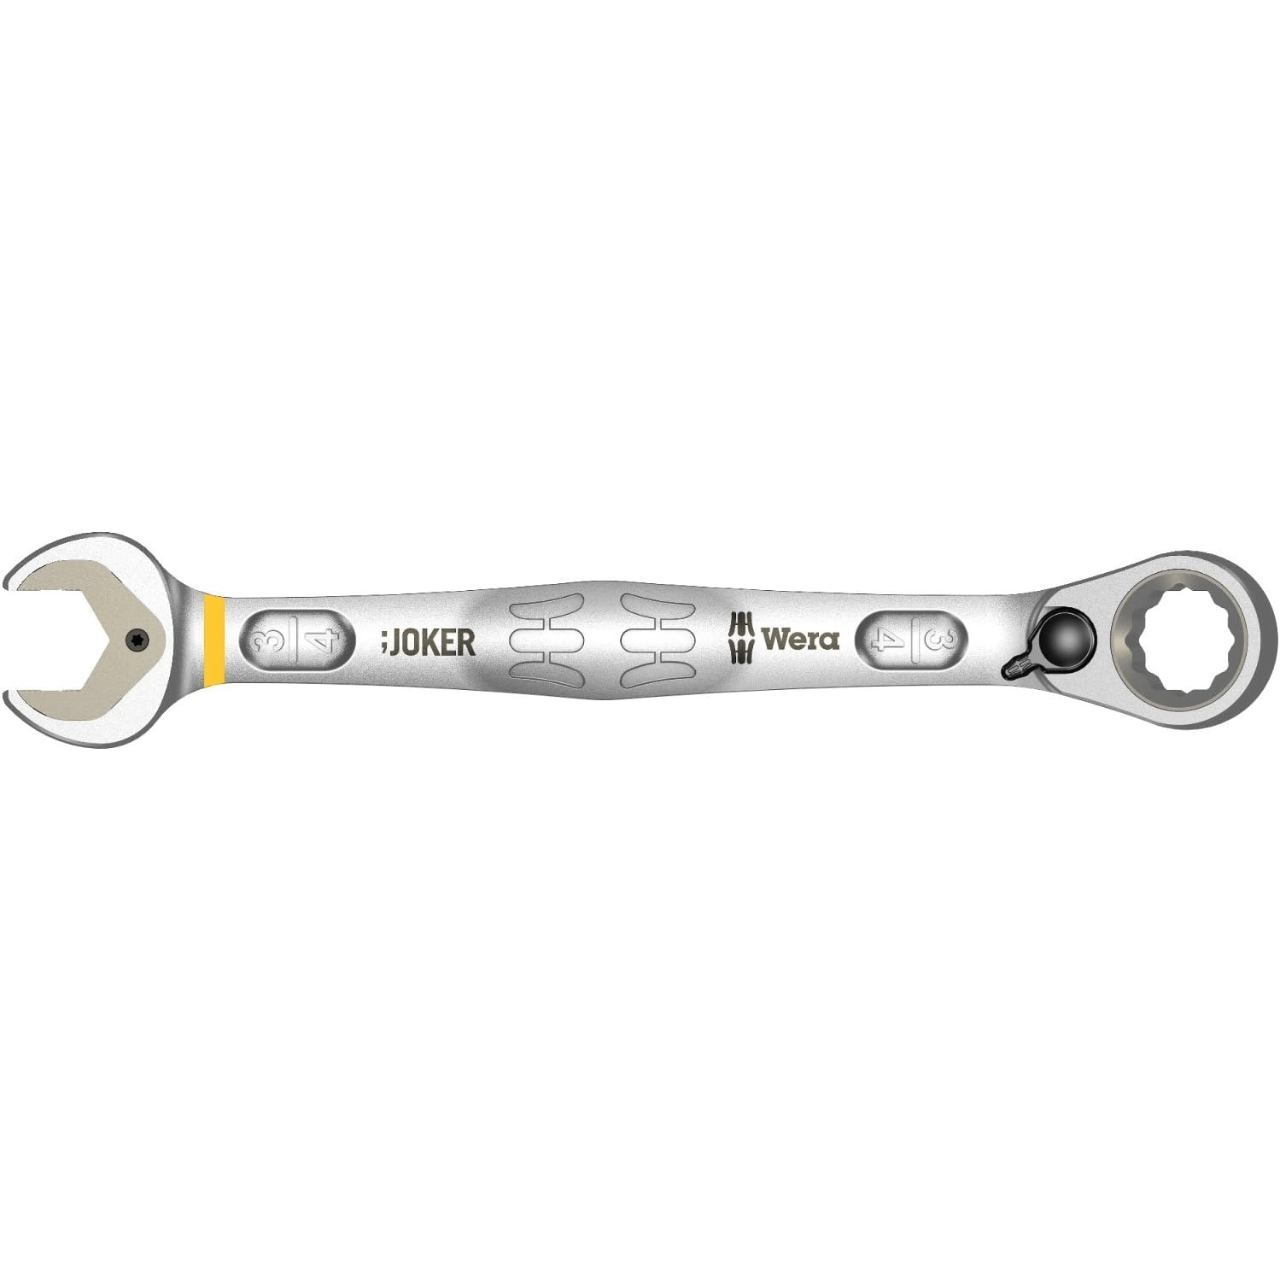 WERA 6000 Joker Ratcheting combination wrench, Imperial 3/4"x246mm